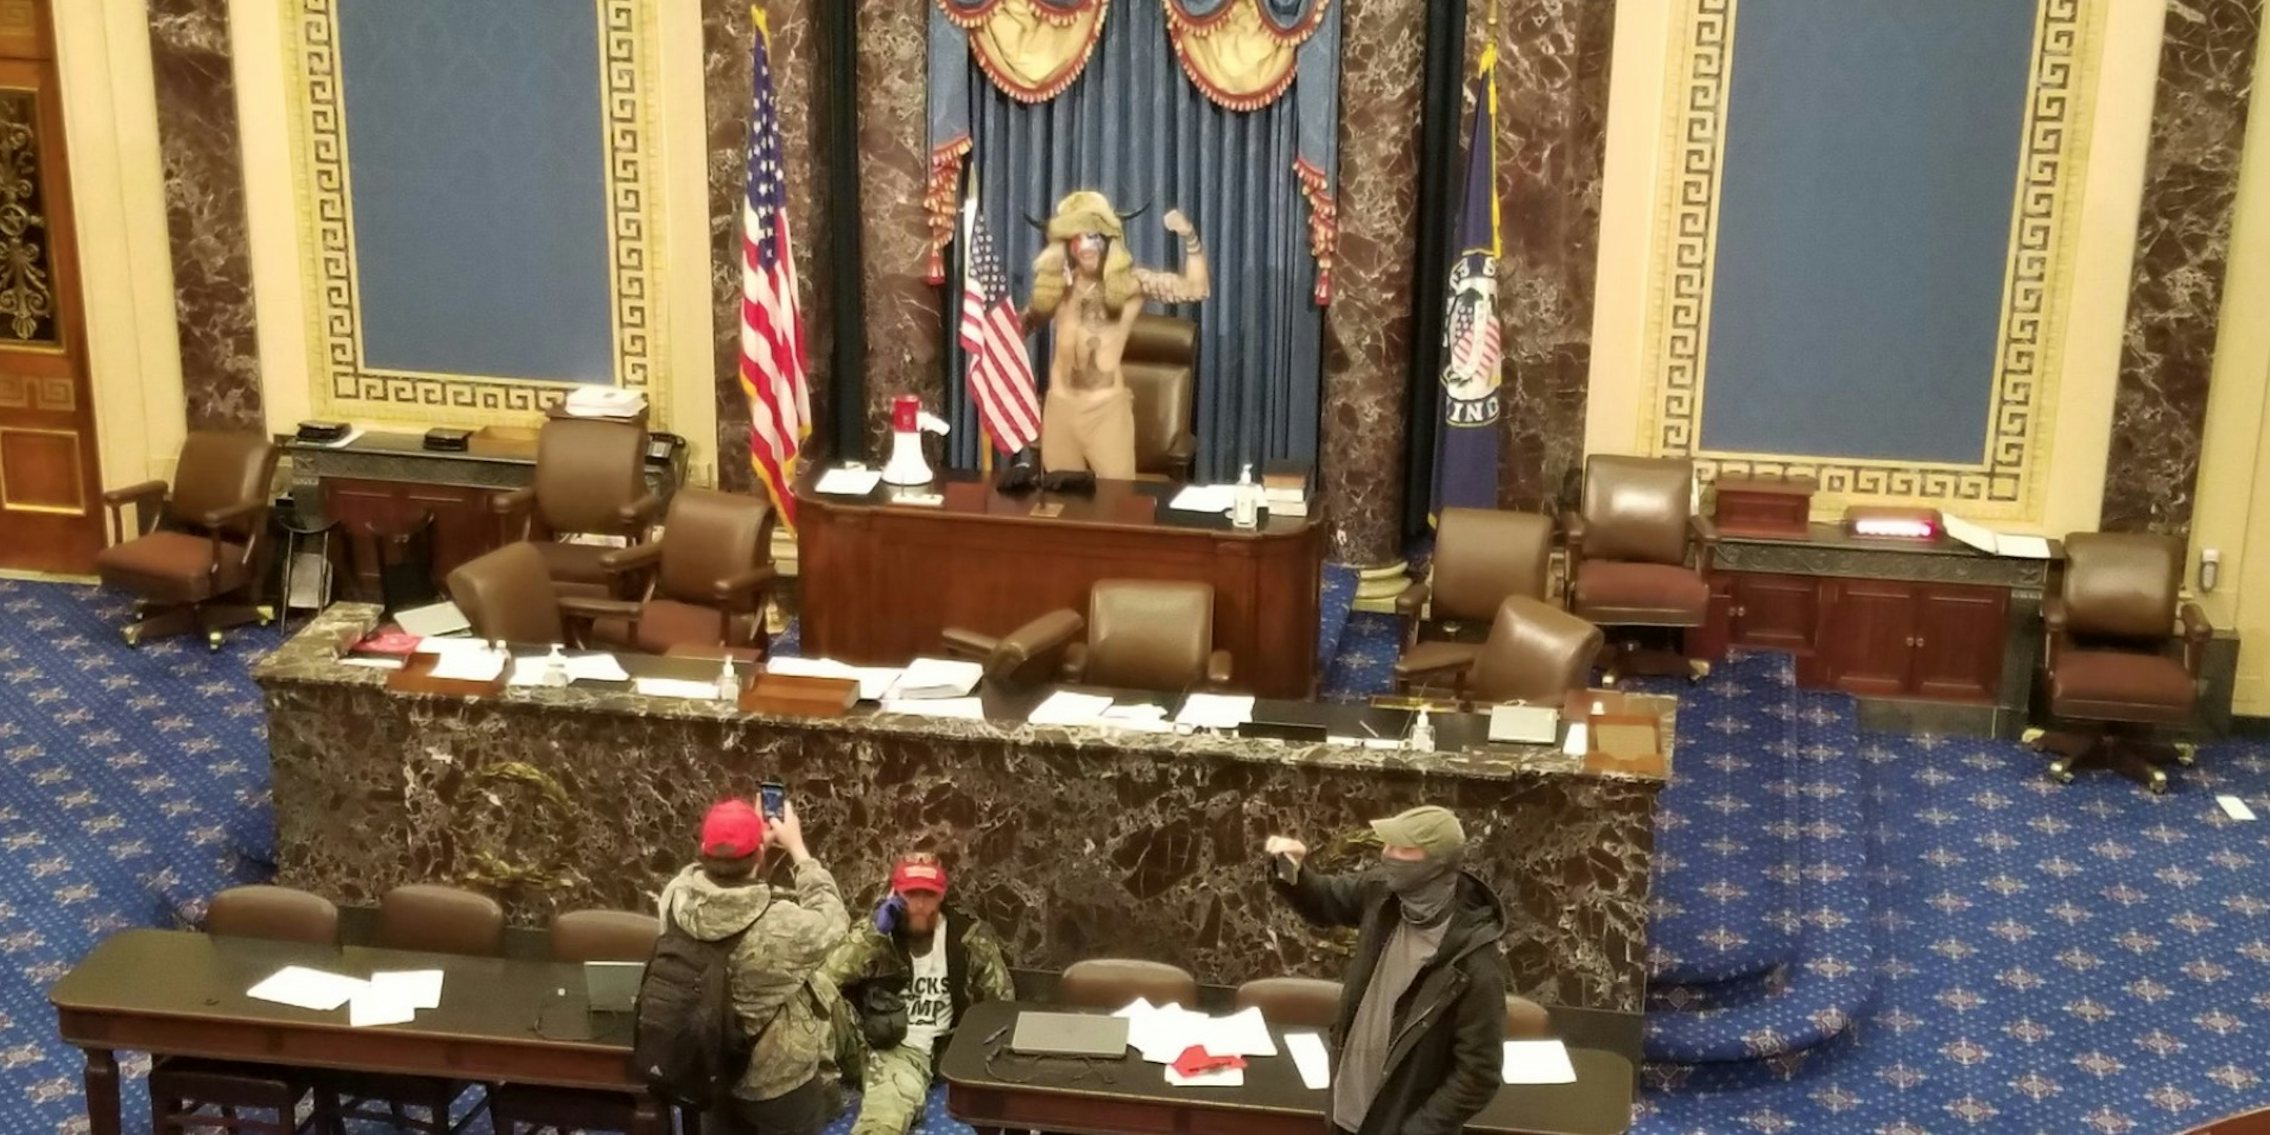 qanon supporter stands in the house of representatives